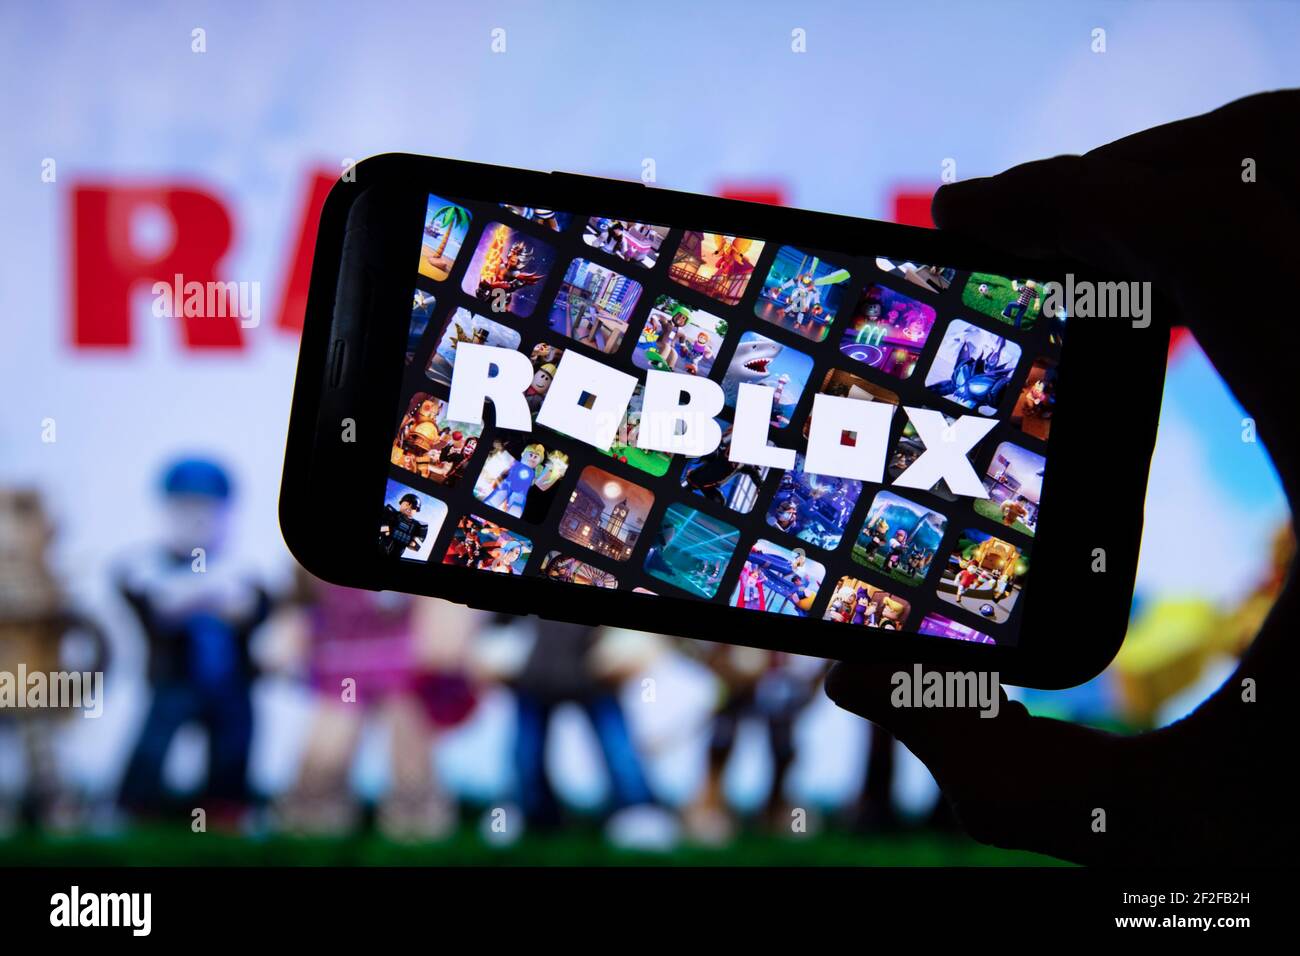 Roblox Game On Computer Screen. Monitor, Keyboard And Airpods On Wooden  Table. Selective Focus. Stock Photo, Picture and Royalty Free Image. Image  176369548.